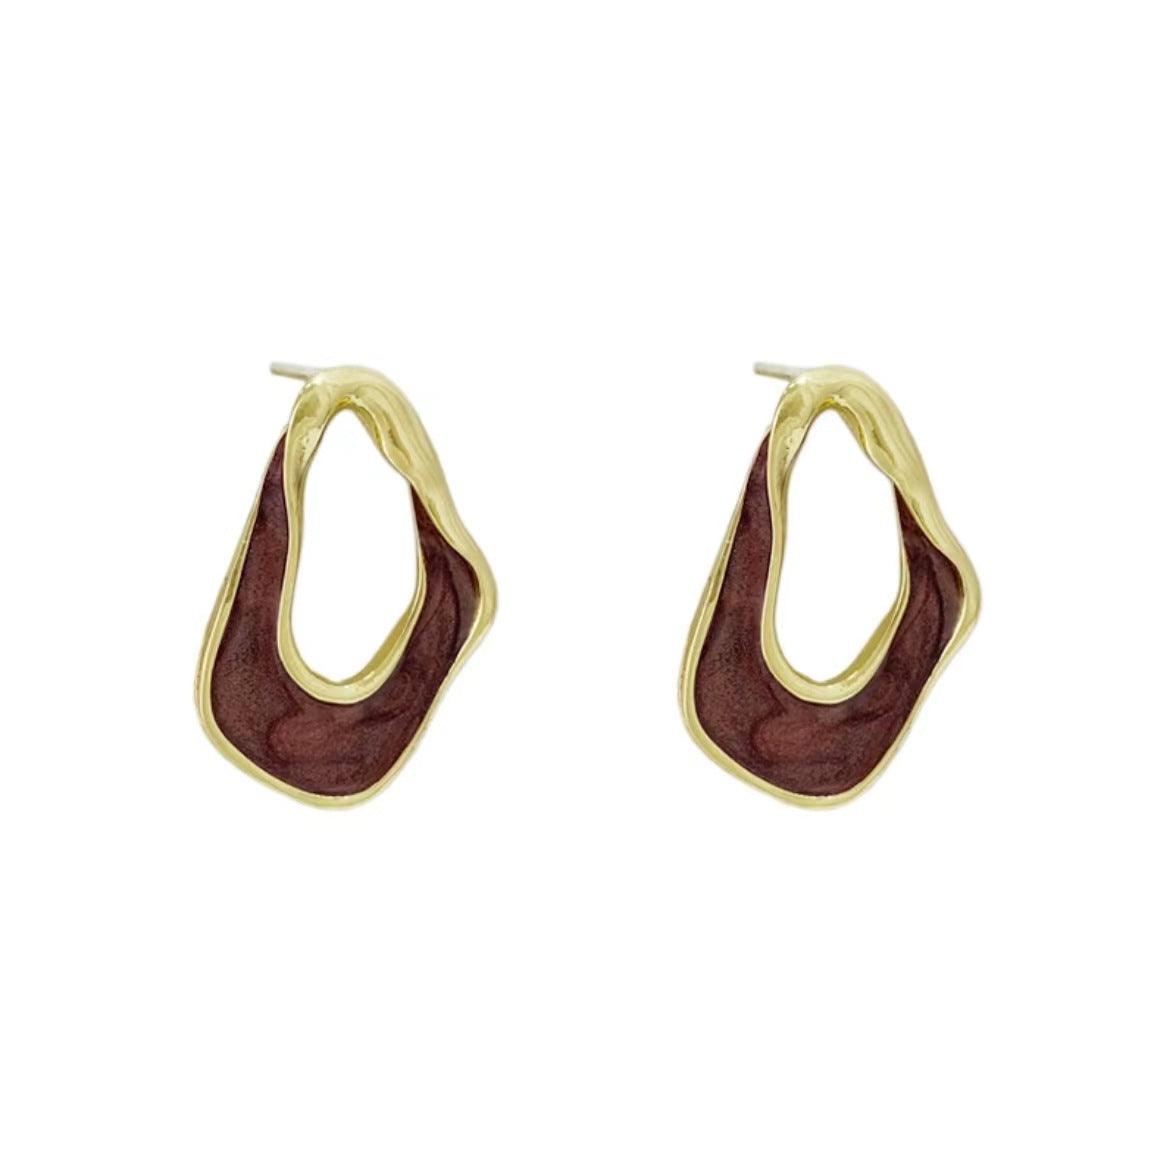 Twisted Simple Exquisite Korean New Fashion Earrings - MODE BY OH